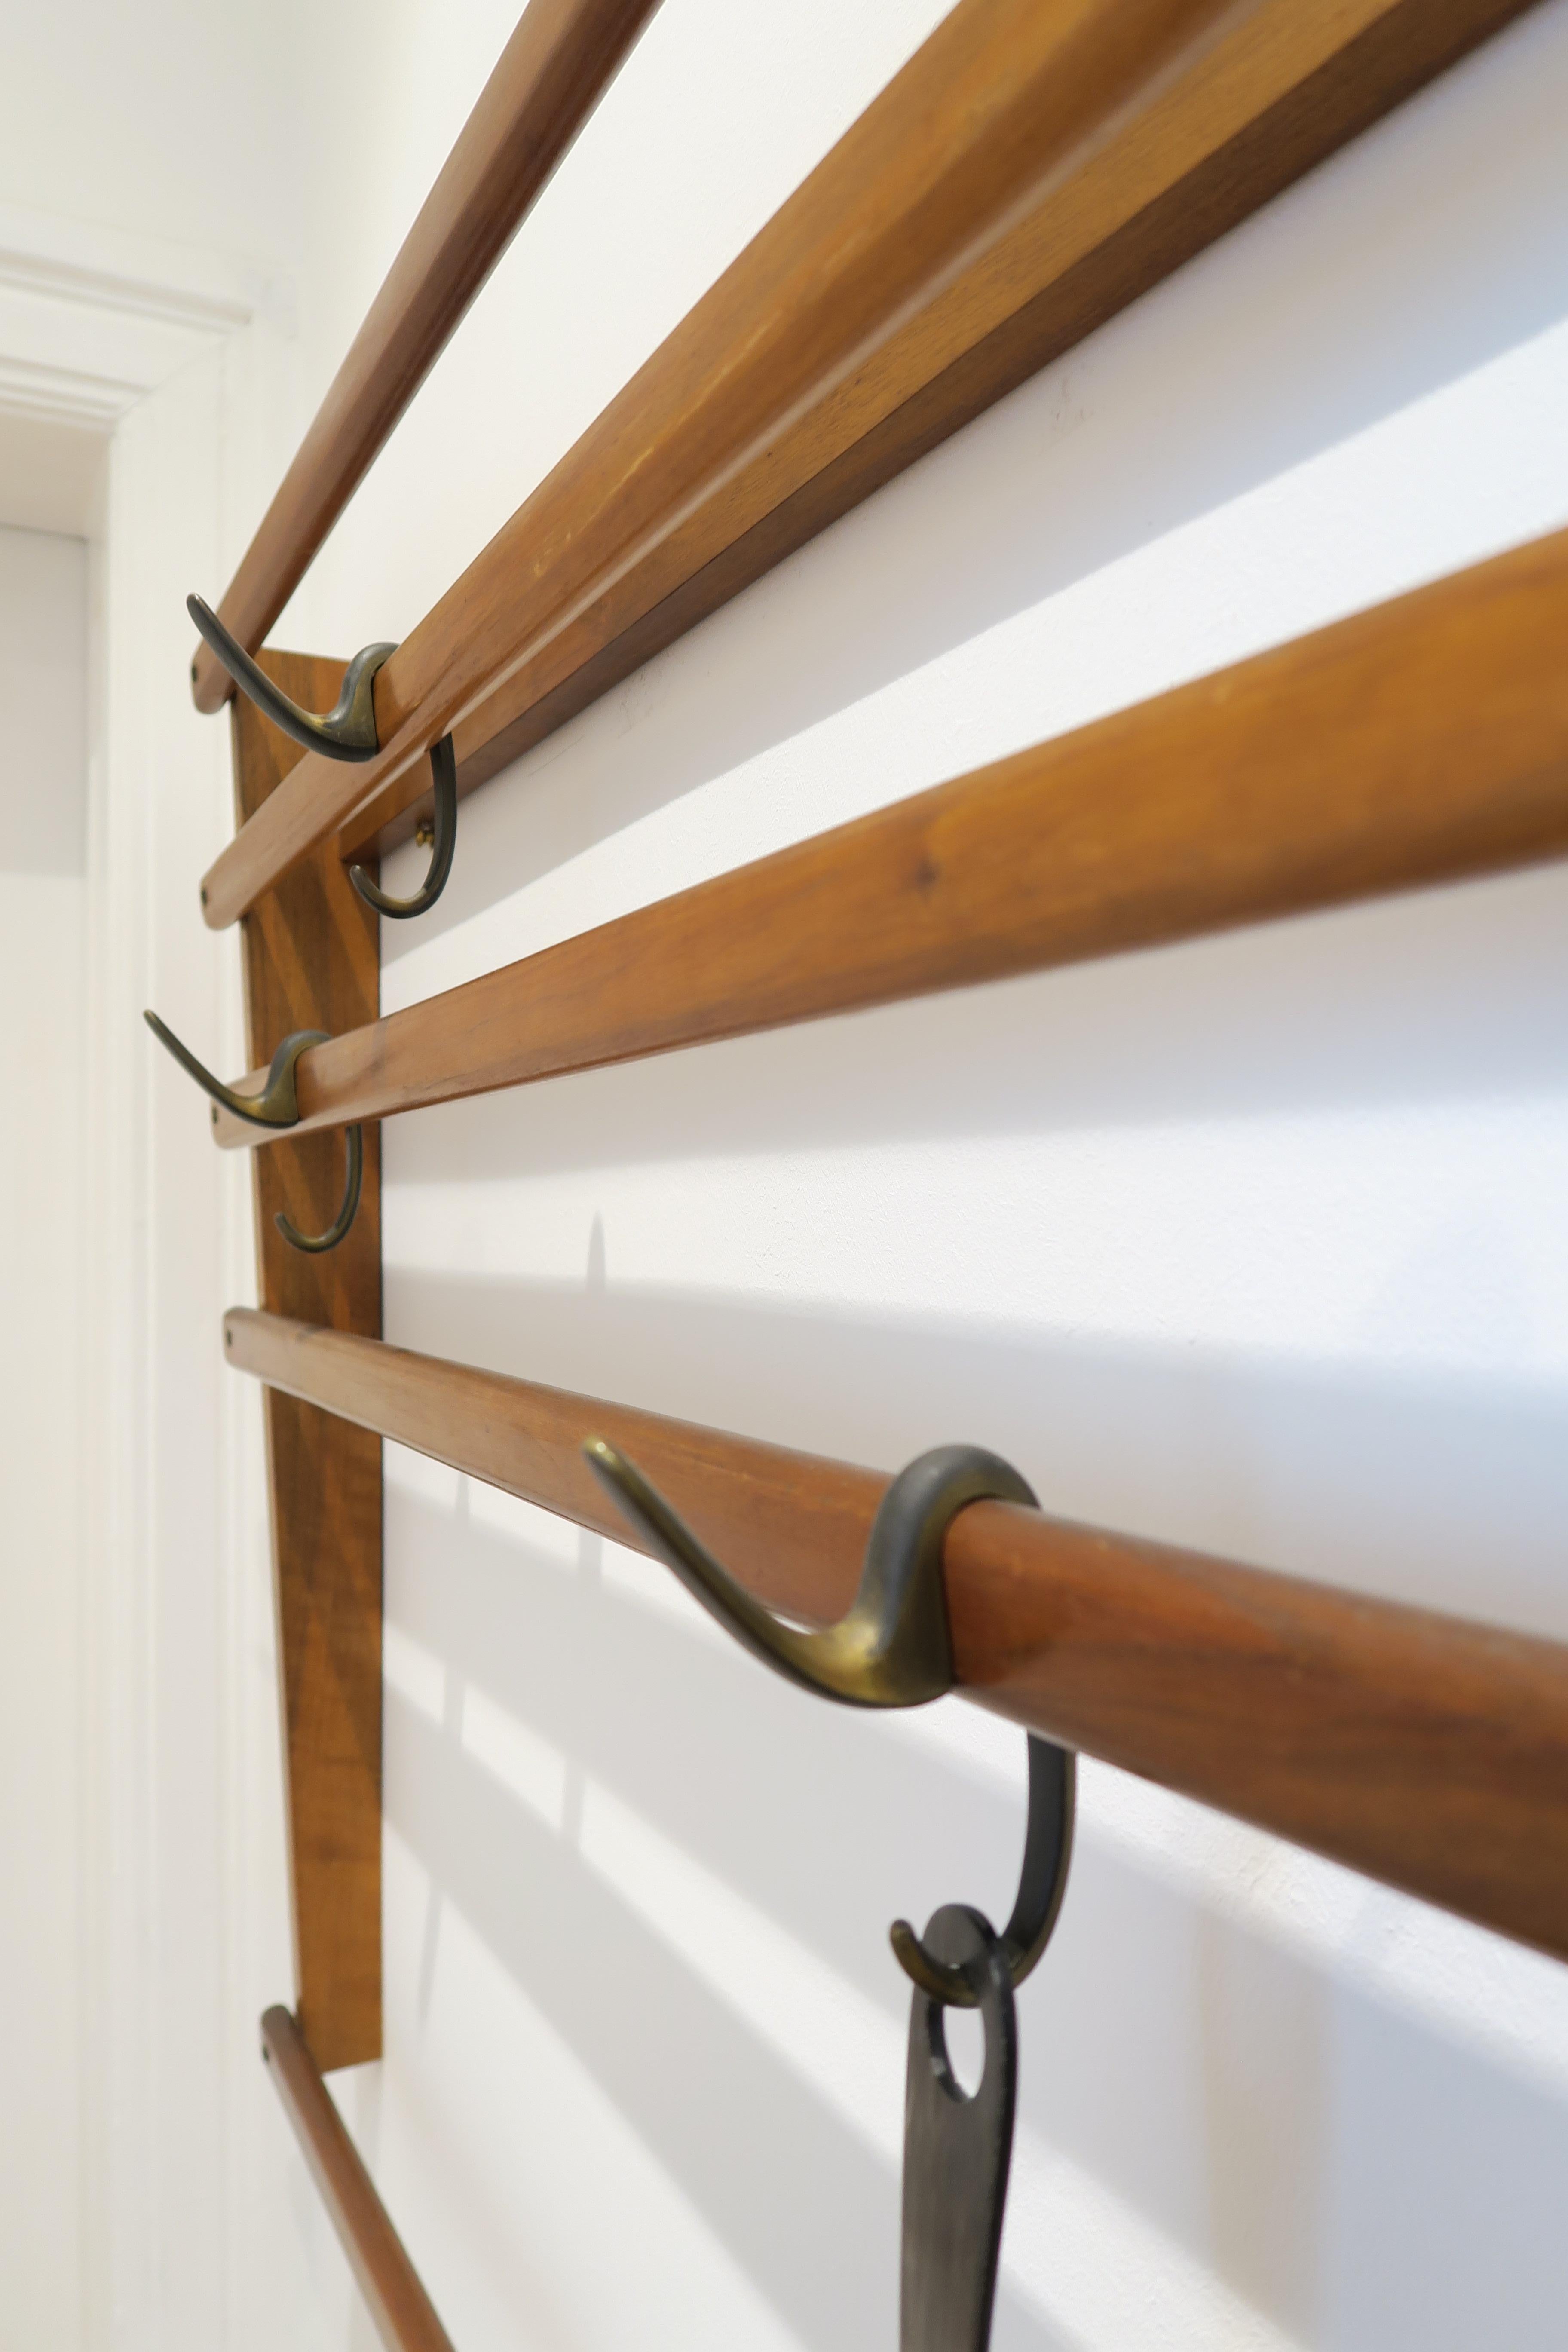 For sale is an original Mid-Century Modern piece of design. The coat rack consists of beautiful warm nutwood with four brass hooks. The wooden slats have been assembled with raised countersunk brass screws. Both materials have gained a nice patina